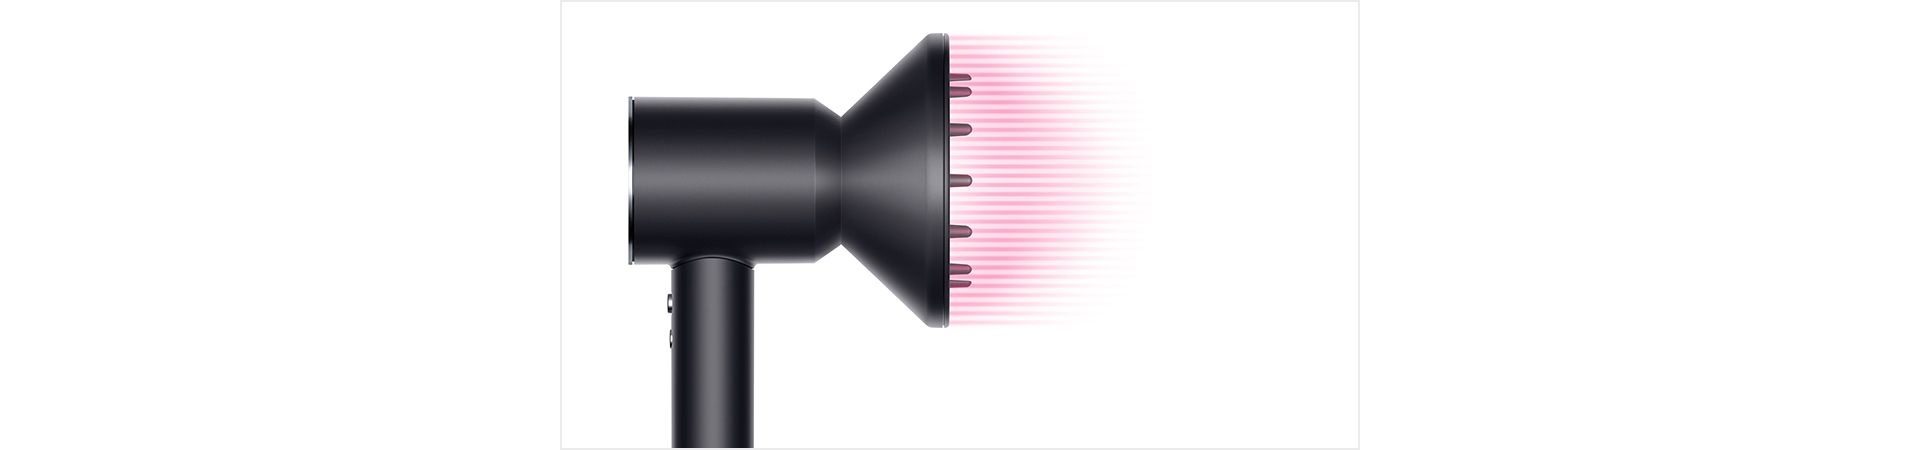 Dyson Supersonic™ hair dryer Black/Nickel with re-engineered Diffuser attached